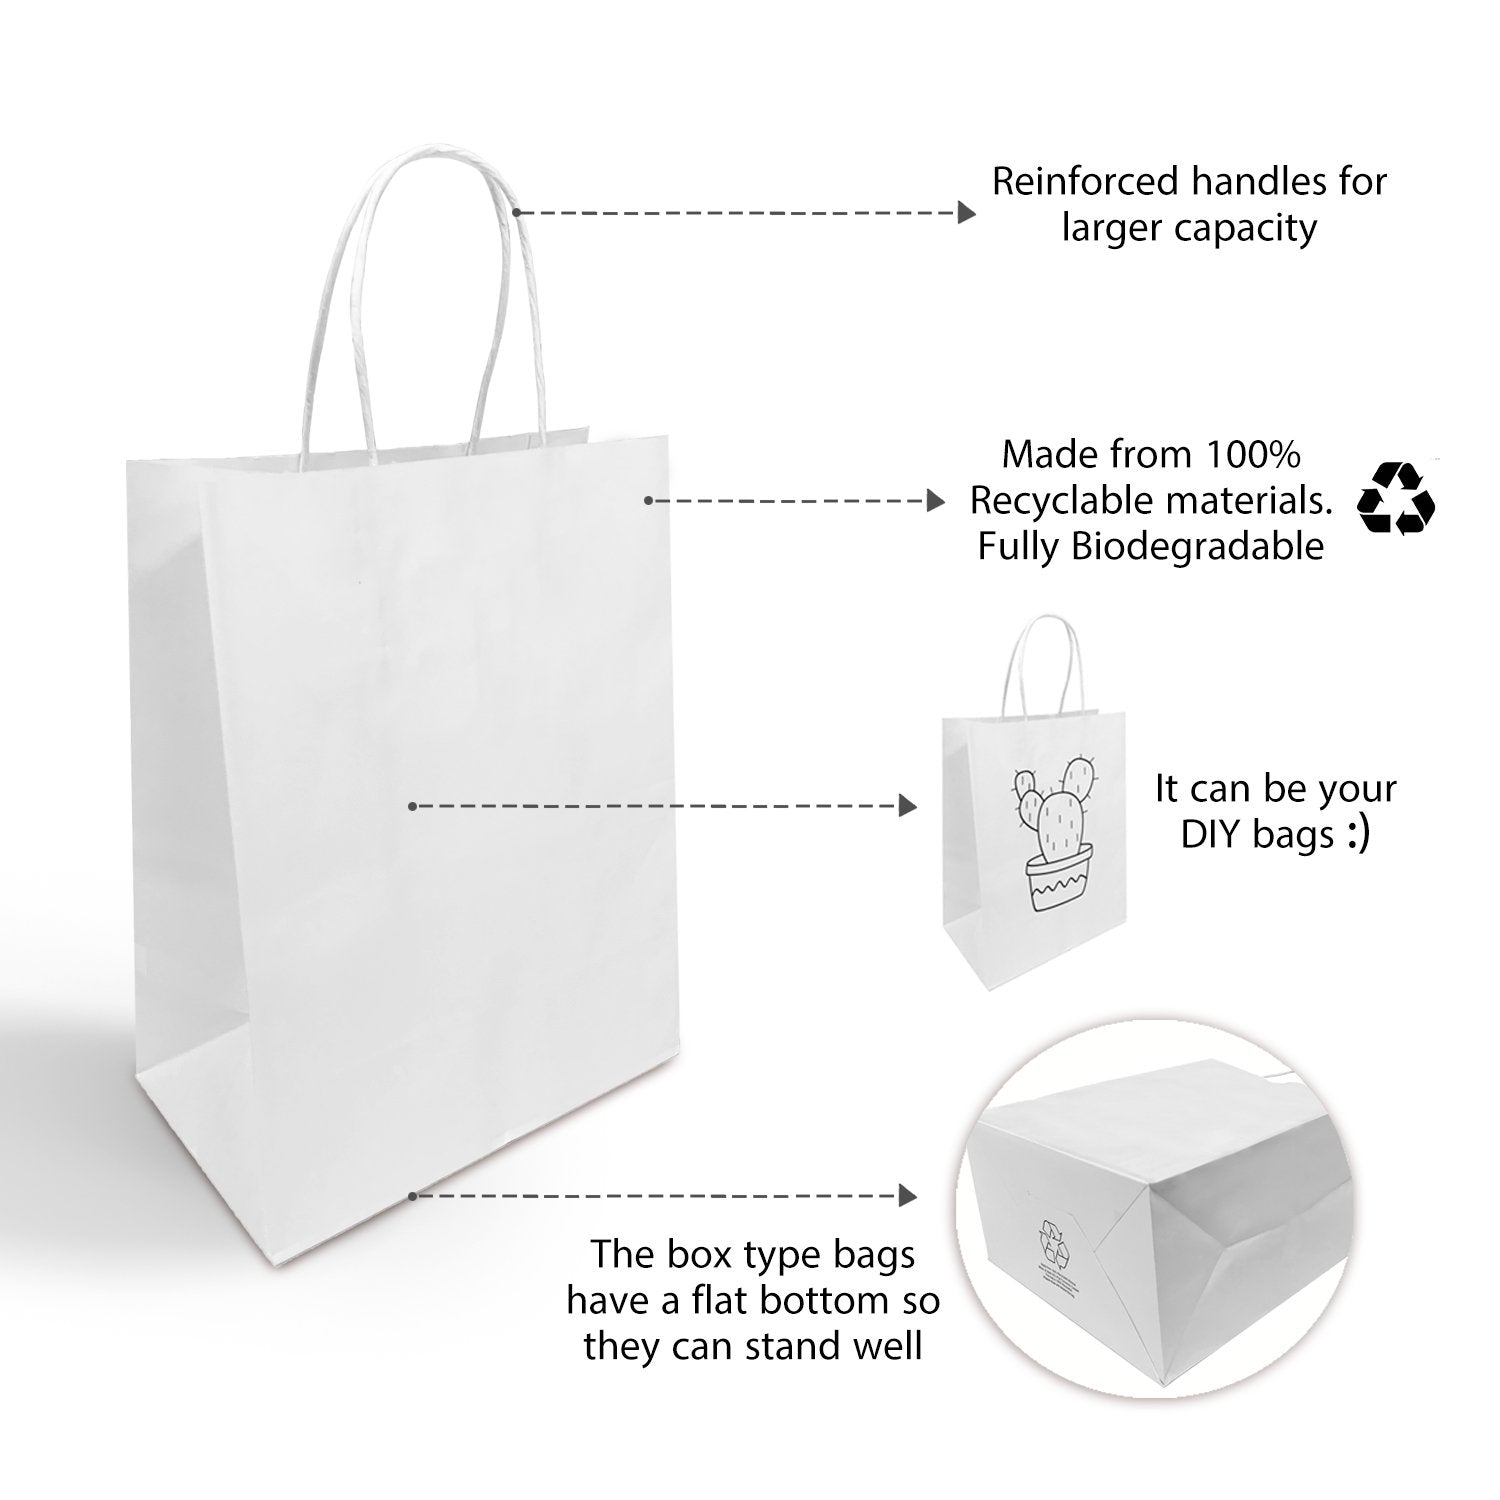 250 Pcs, Cub,  8x4.75x10.25 inches, White Paper Bags, with Twisted Handle